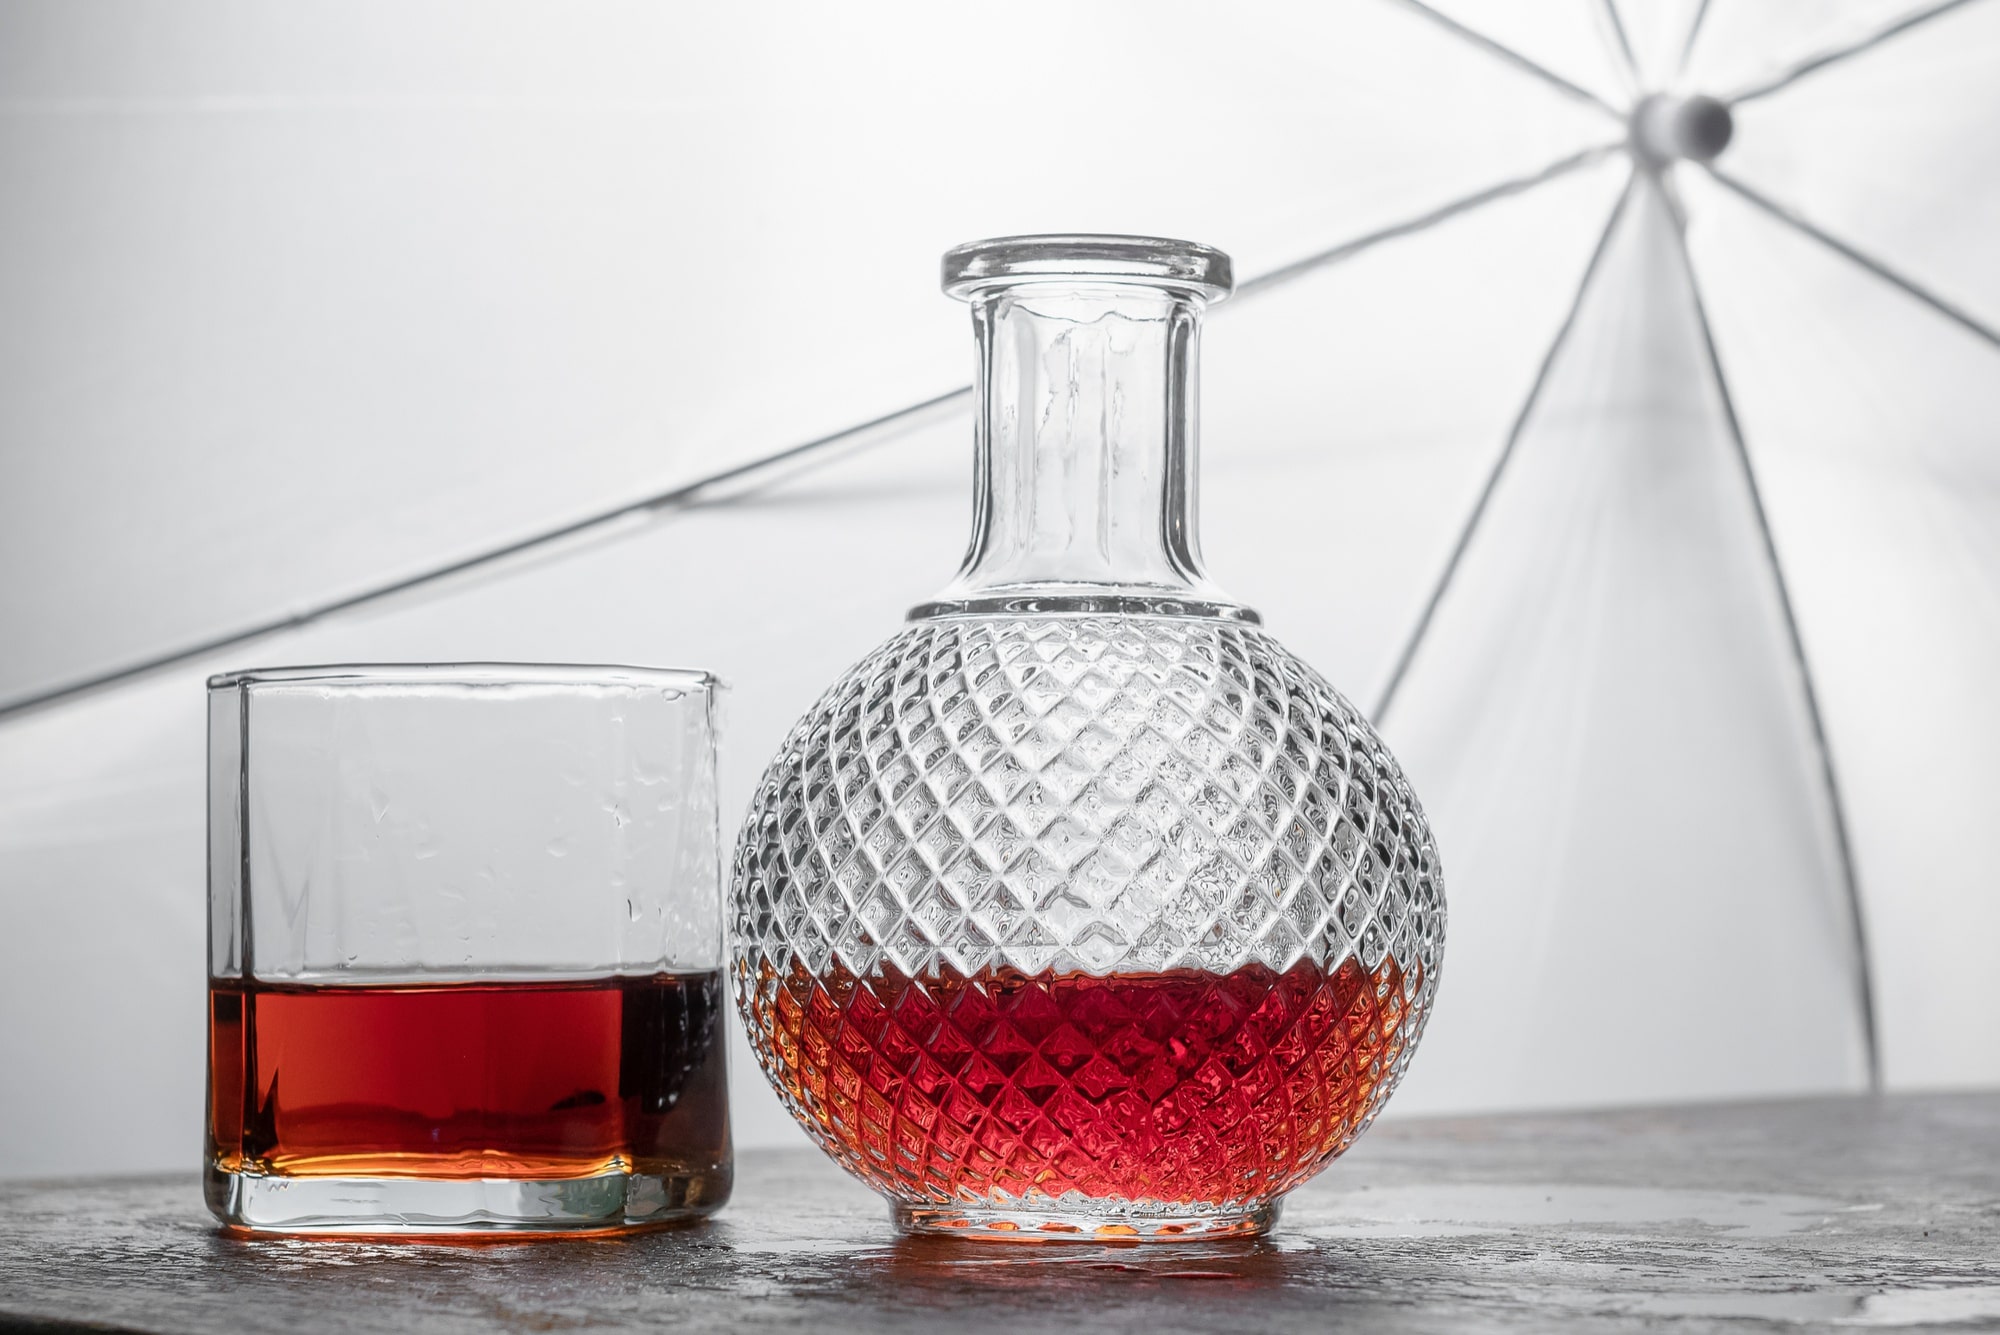 10 Unique Whiskey Decanter Sets That Will Impress Any Whiskey Connoisseur